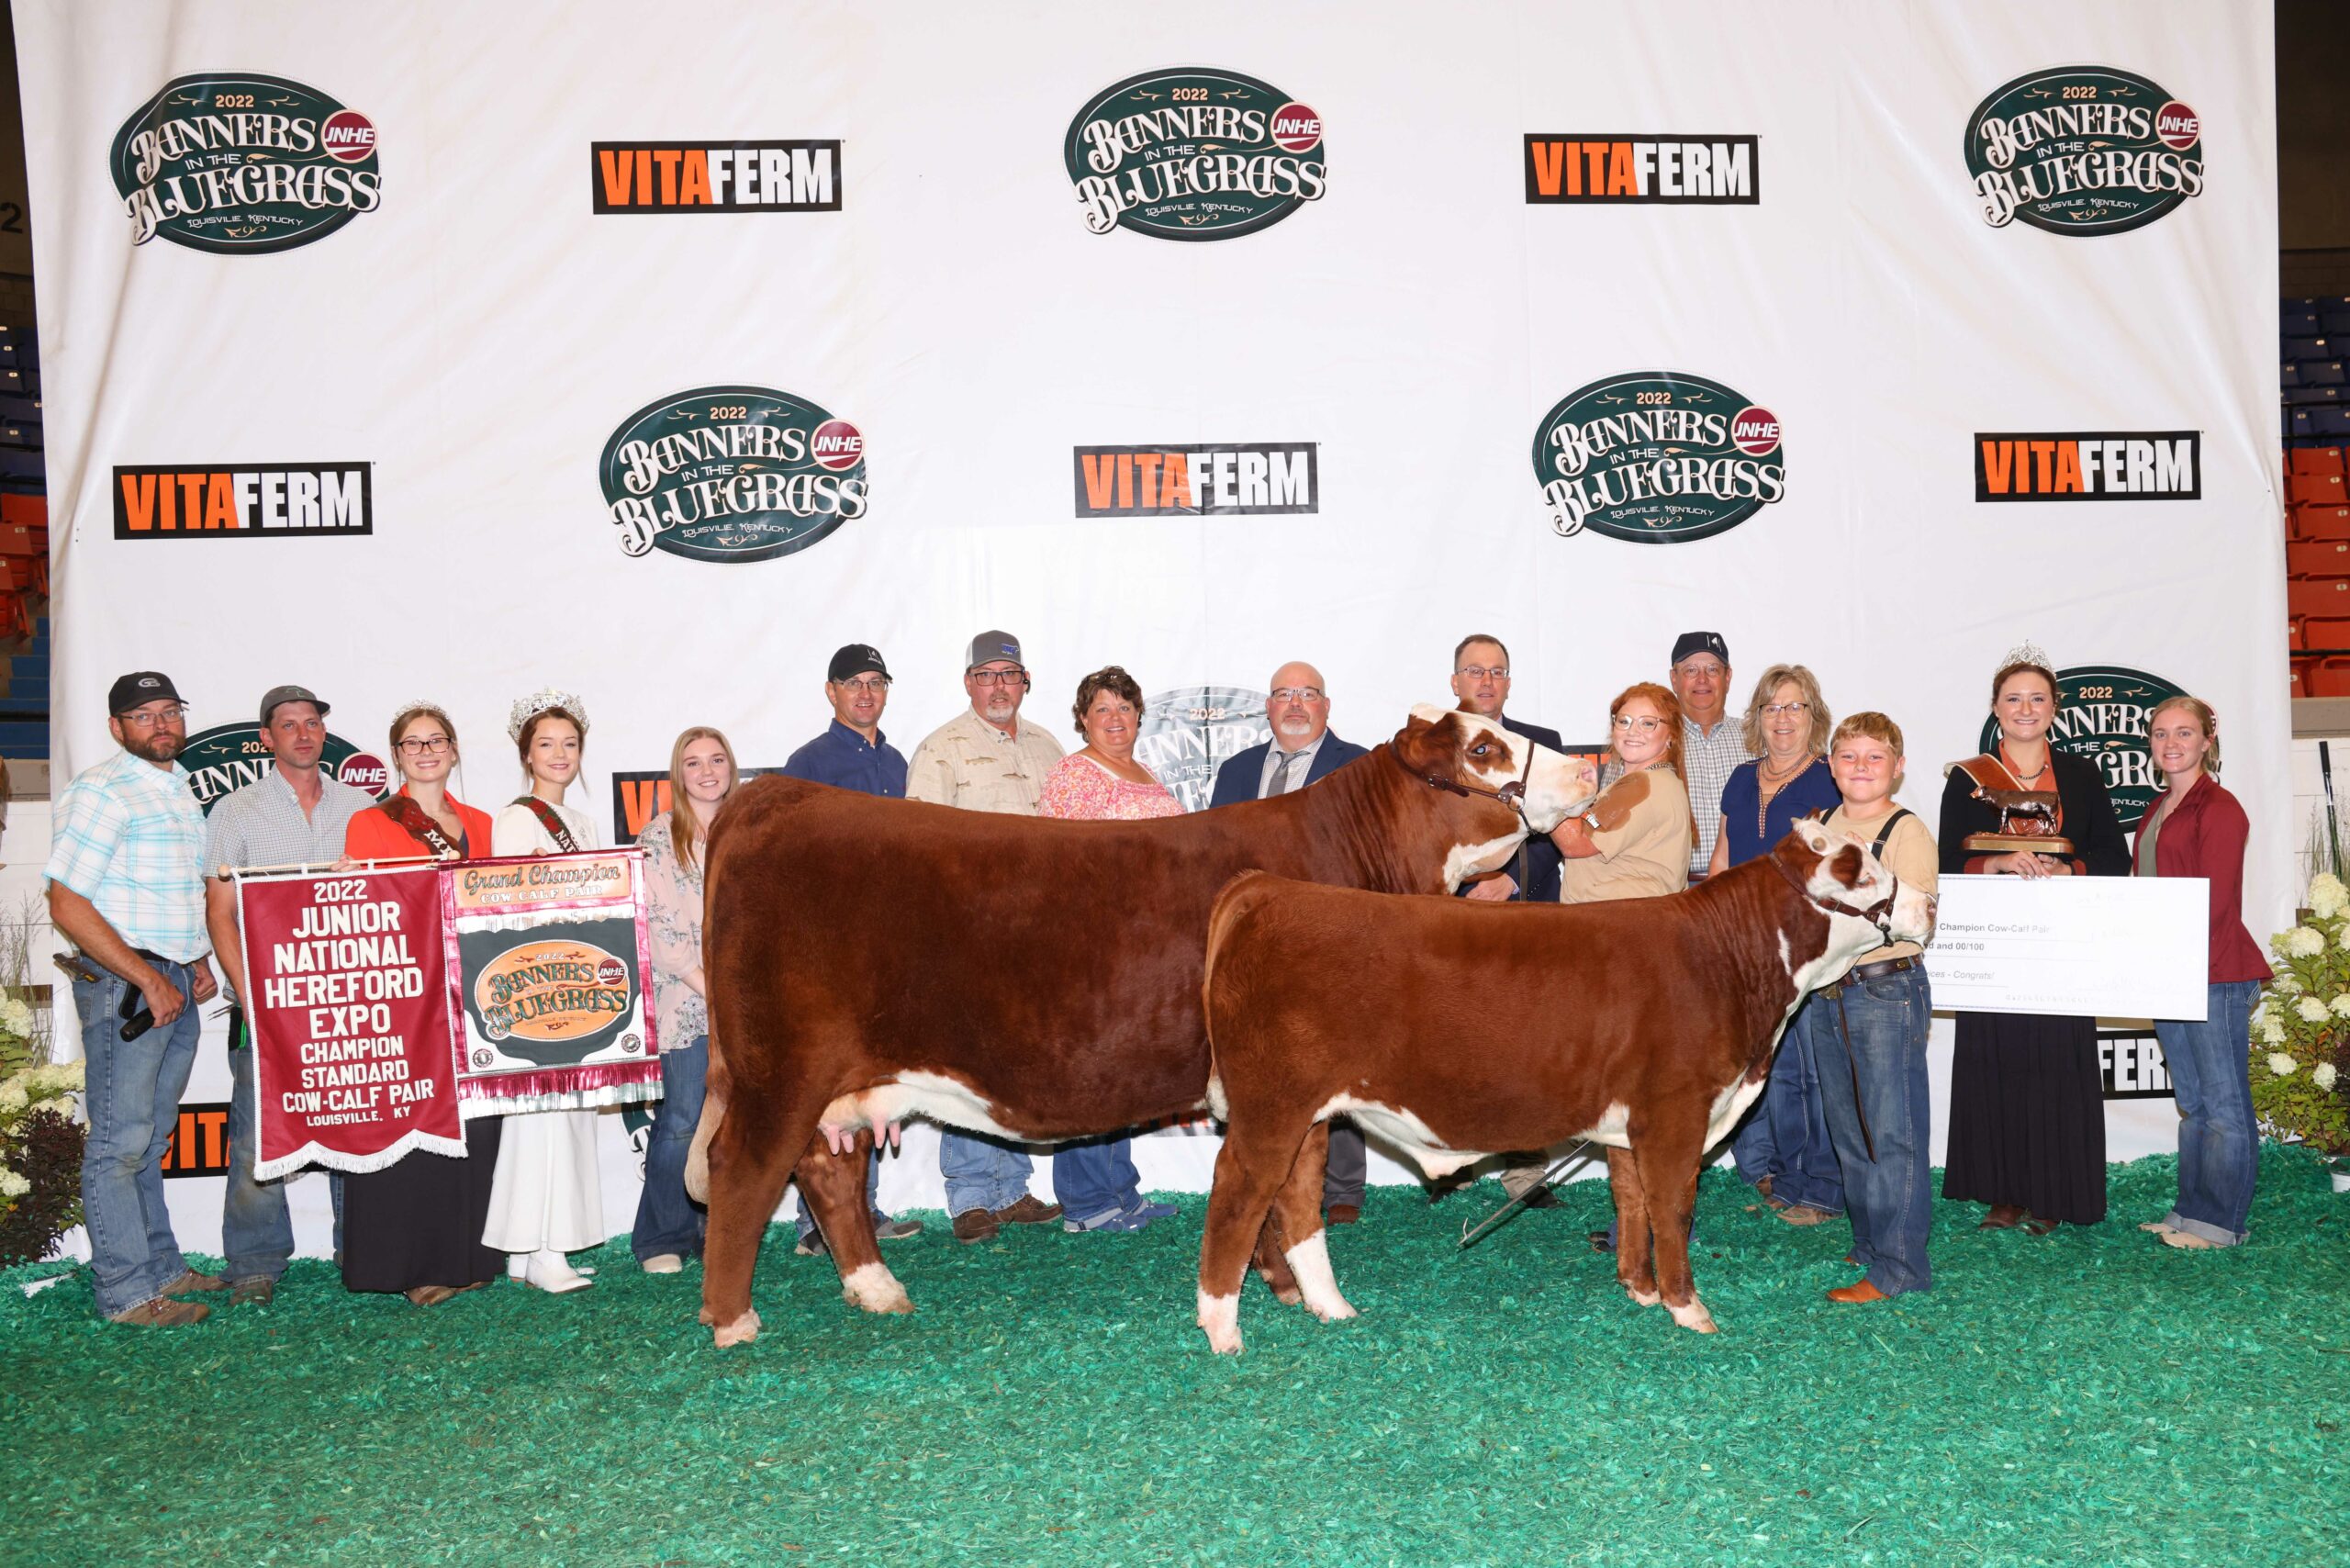 Mayo, Bane Achieve Success in the Cow-Calf Show at the VitaFerm Junior National Hereford Expo